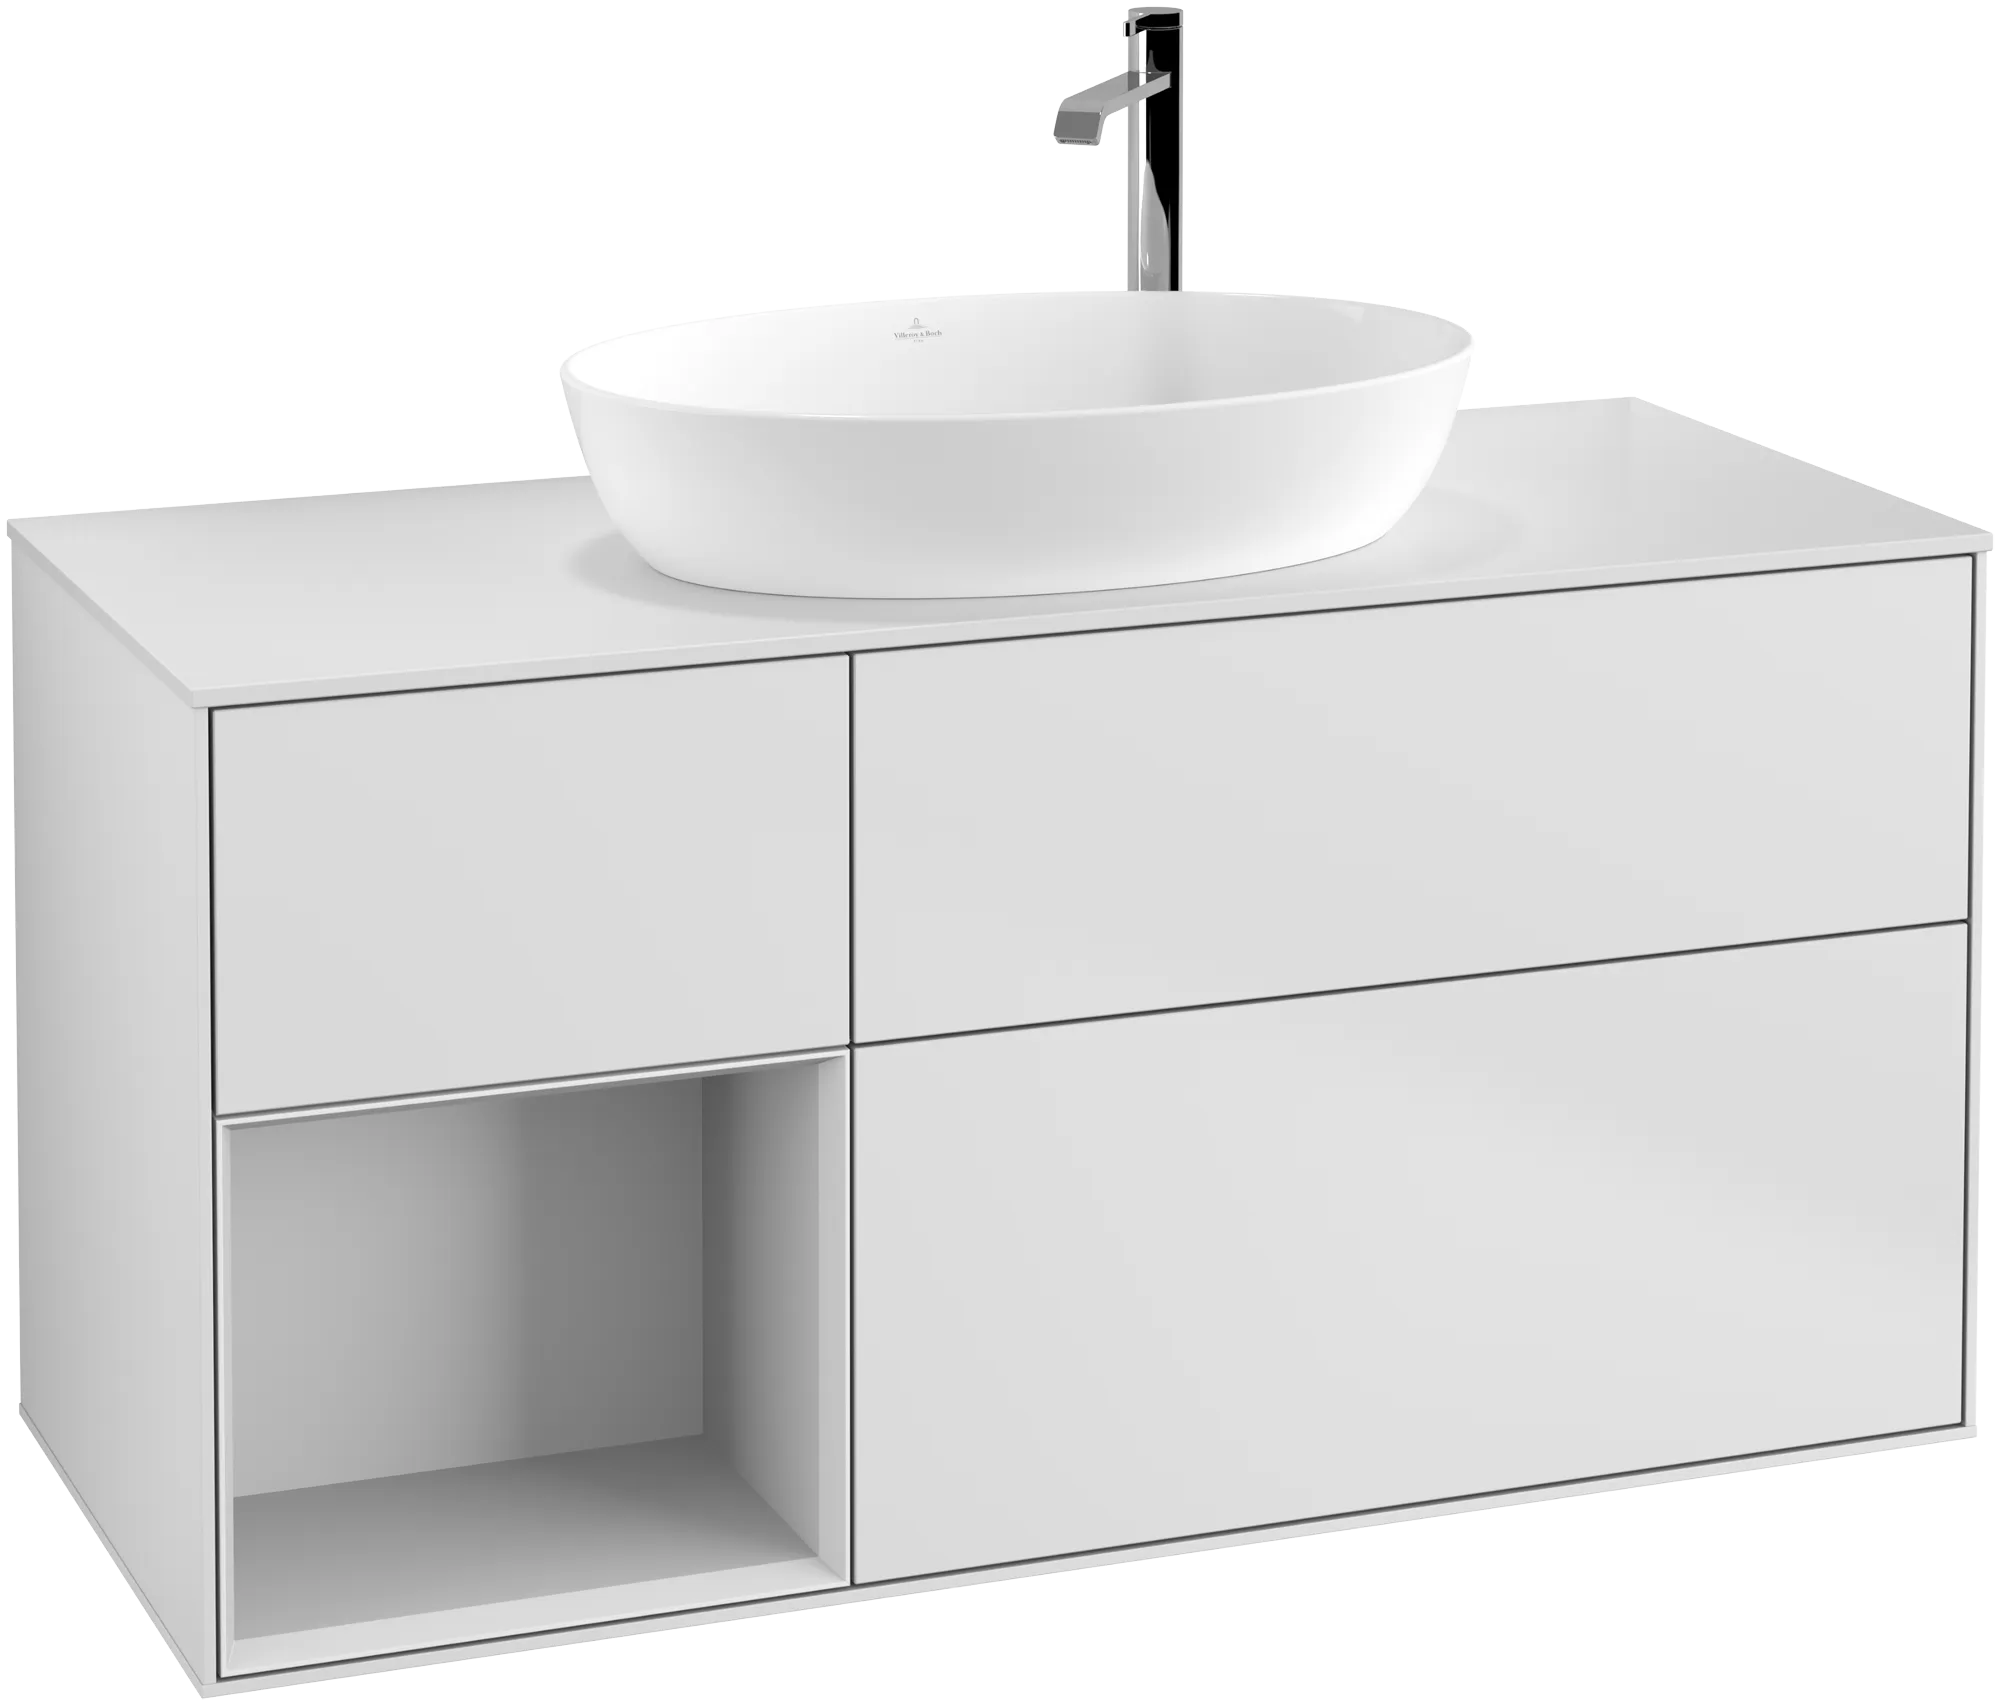 VILLEROY BOCH Finion Vanity unit, with lighting, 3 pull-out compartments, 1200 x 603 x 501 mm, White Matt Lacquer / White Matt Lacquer / Glass White Matt #G941MTMT resmi